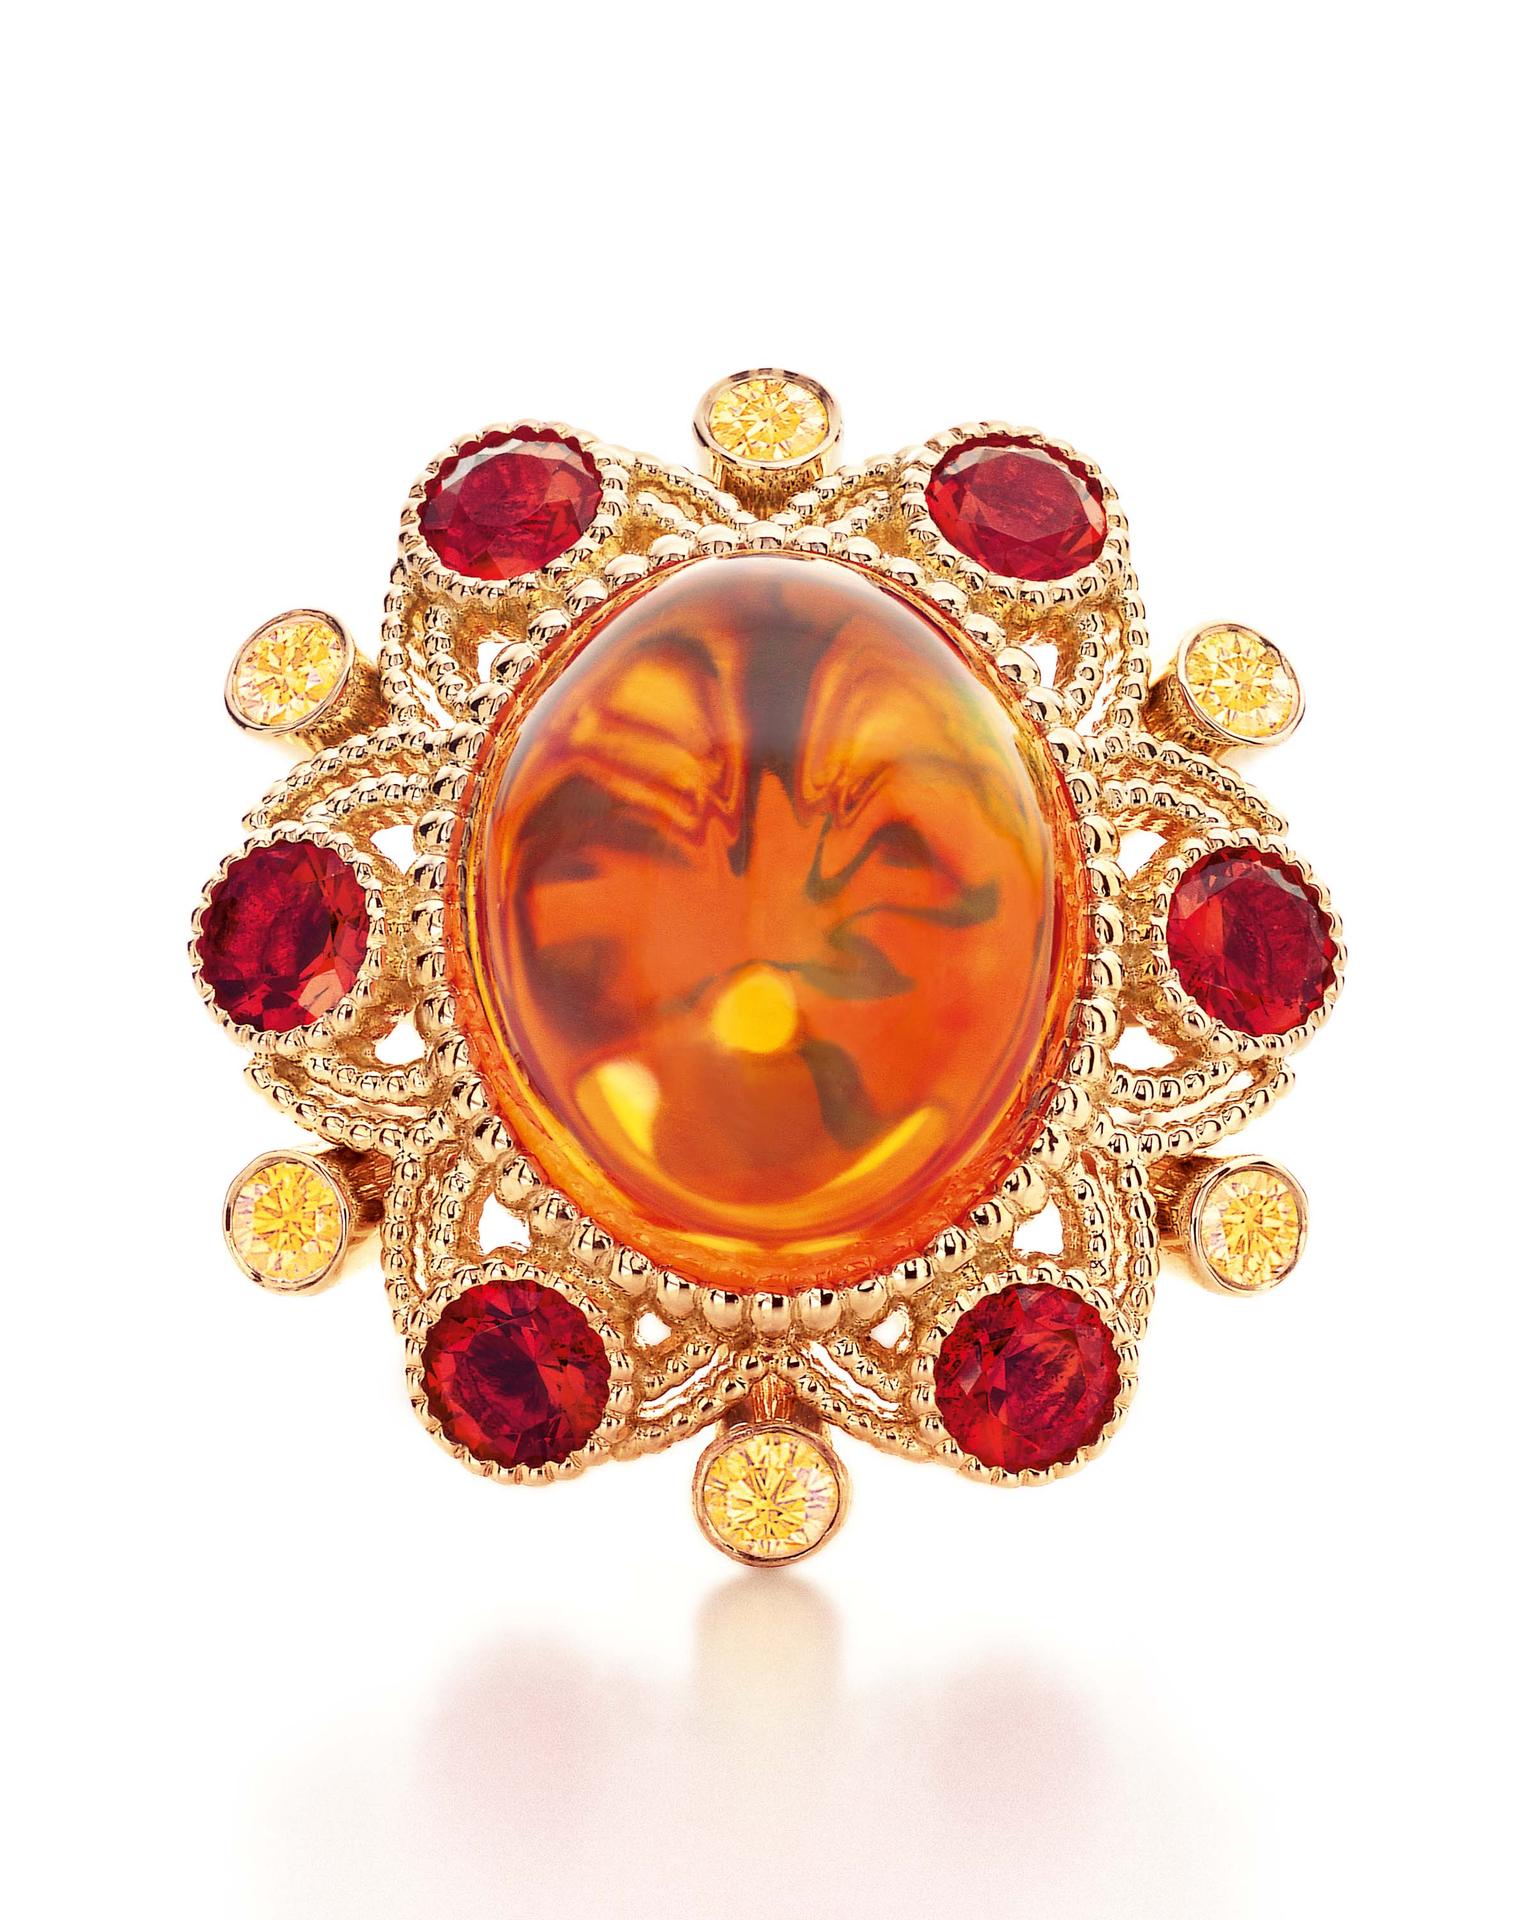 Tiffany & Co. Blue Book Collection ring in gold with a 10.54ct cabochon fire opal, yellow diamonds and smaller faceted fire opals